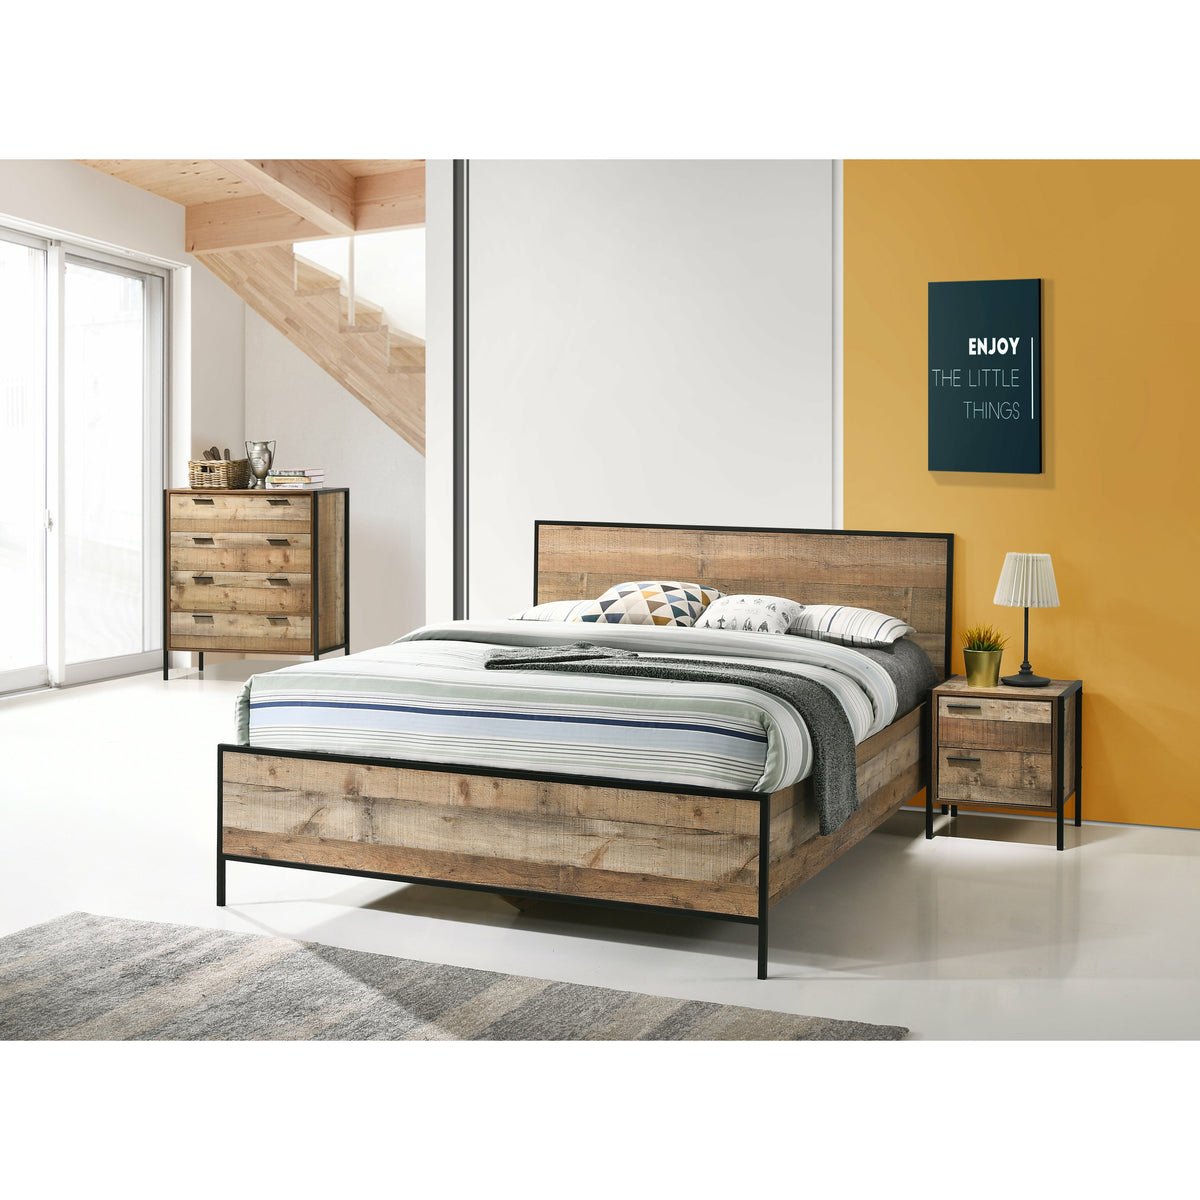 4 Pieces Bedroom Suite with Particle Board Contraction and Metal Legs Queen Size Oak Colour Bed, Bedside Table &amp; Tallboy